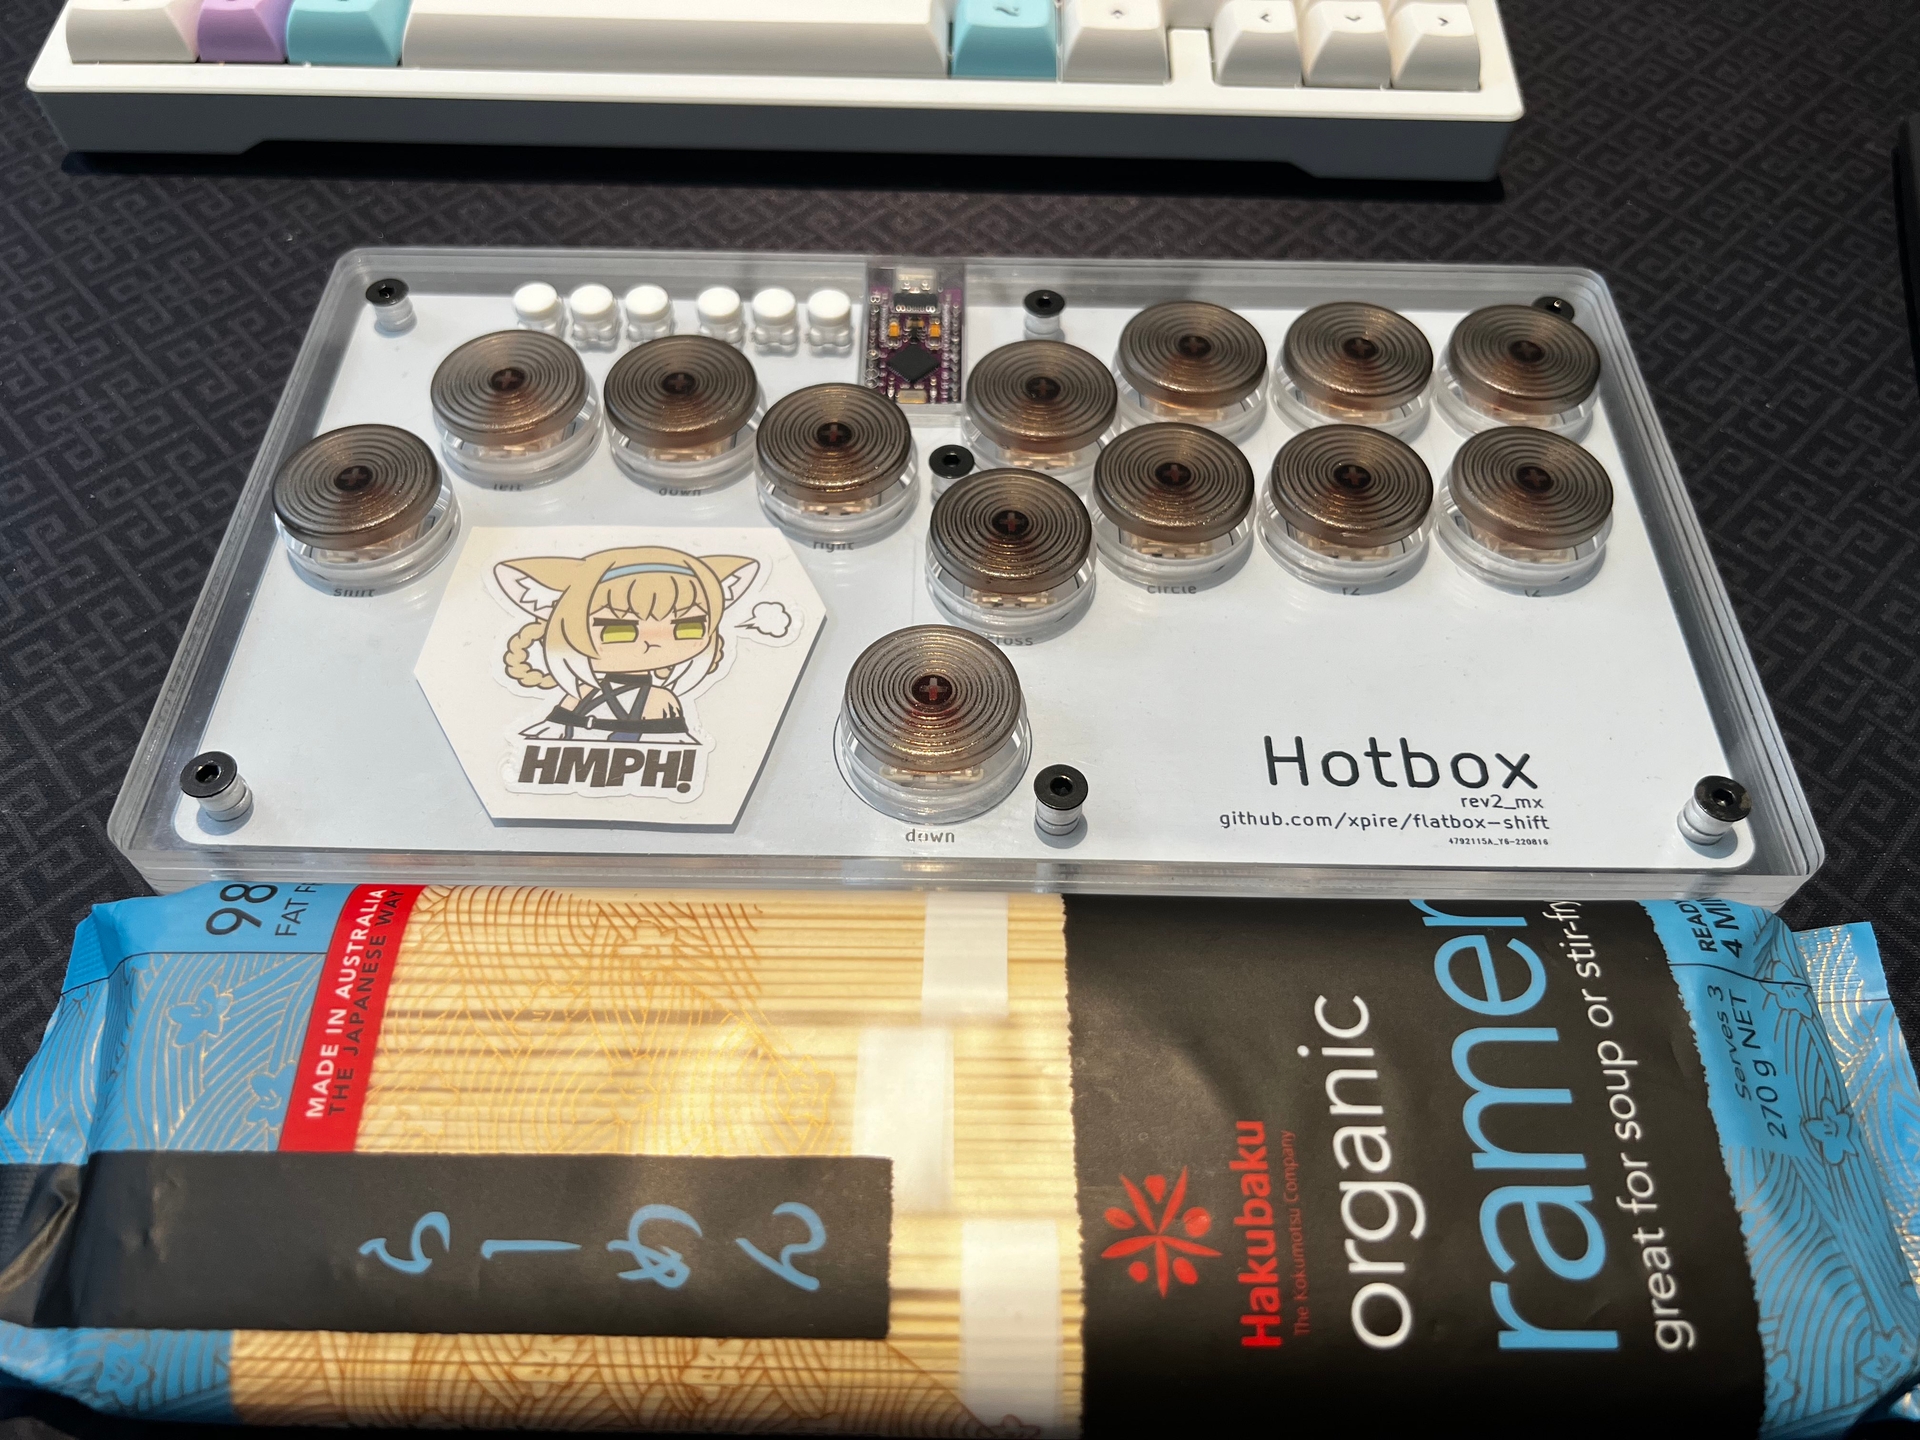 Hotbox - fabricating a low profile hitbox-layout fightstick project image